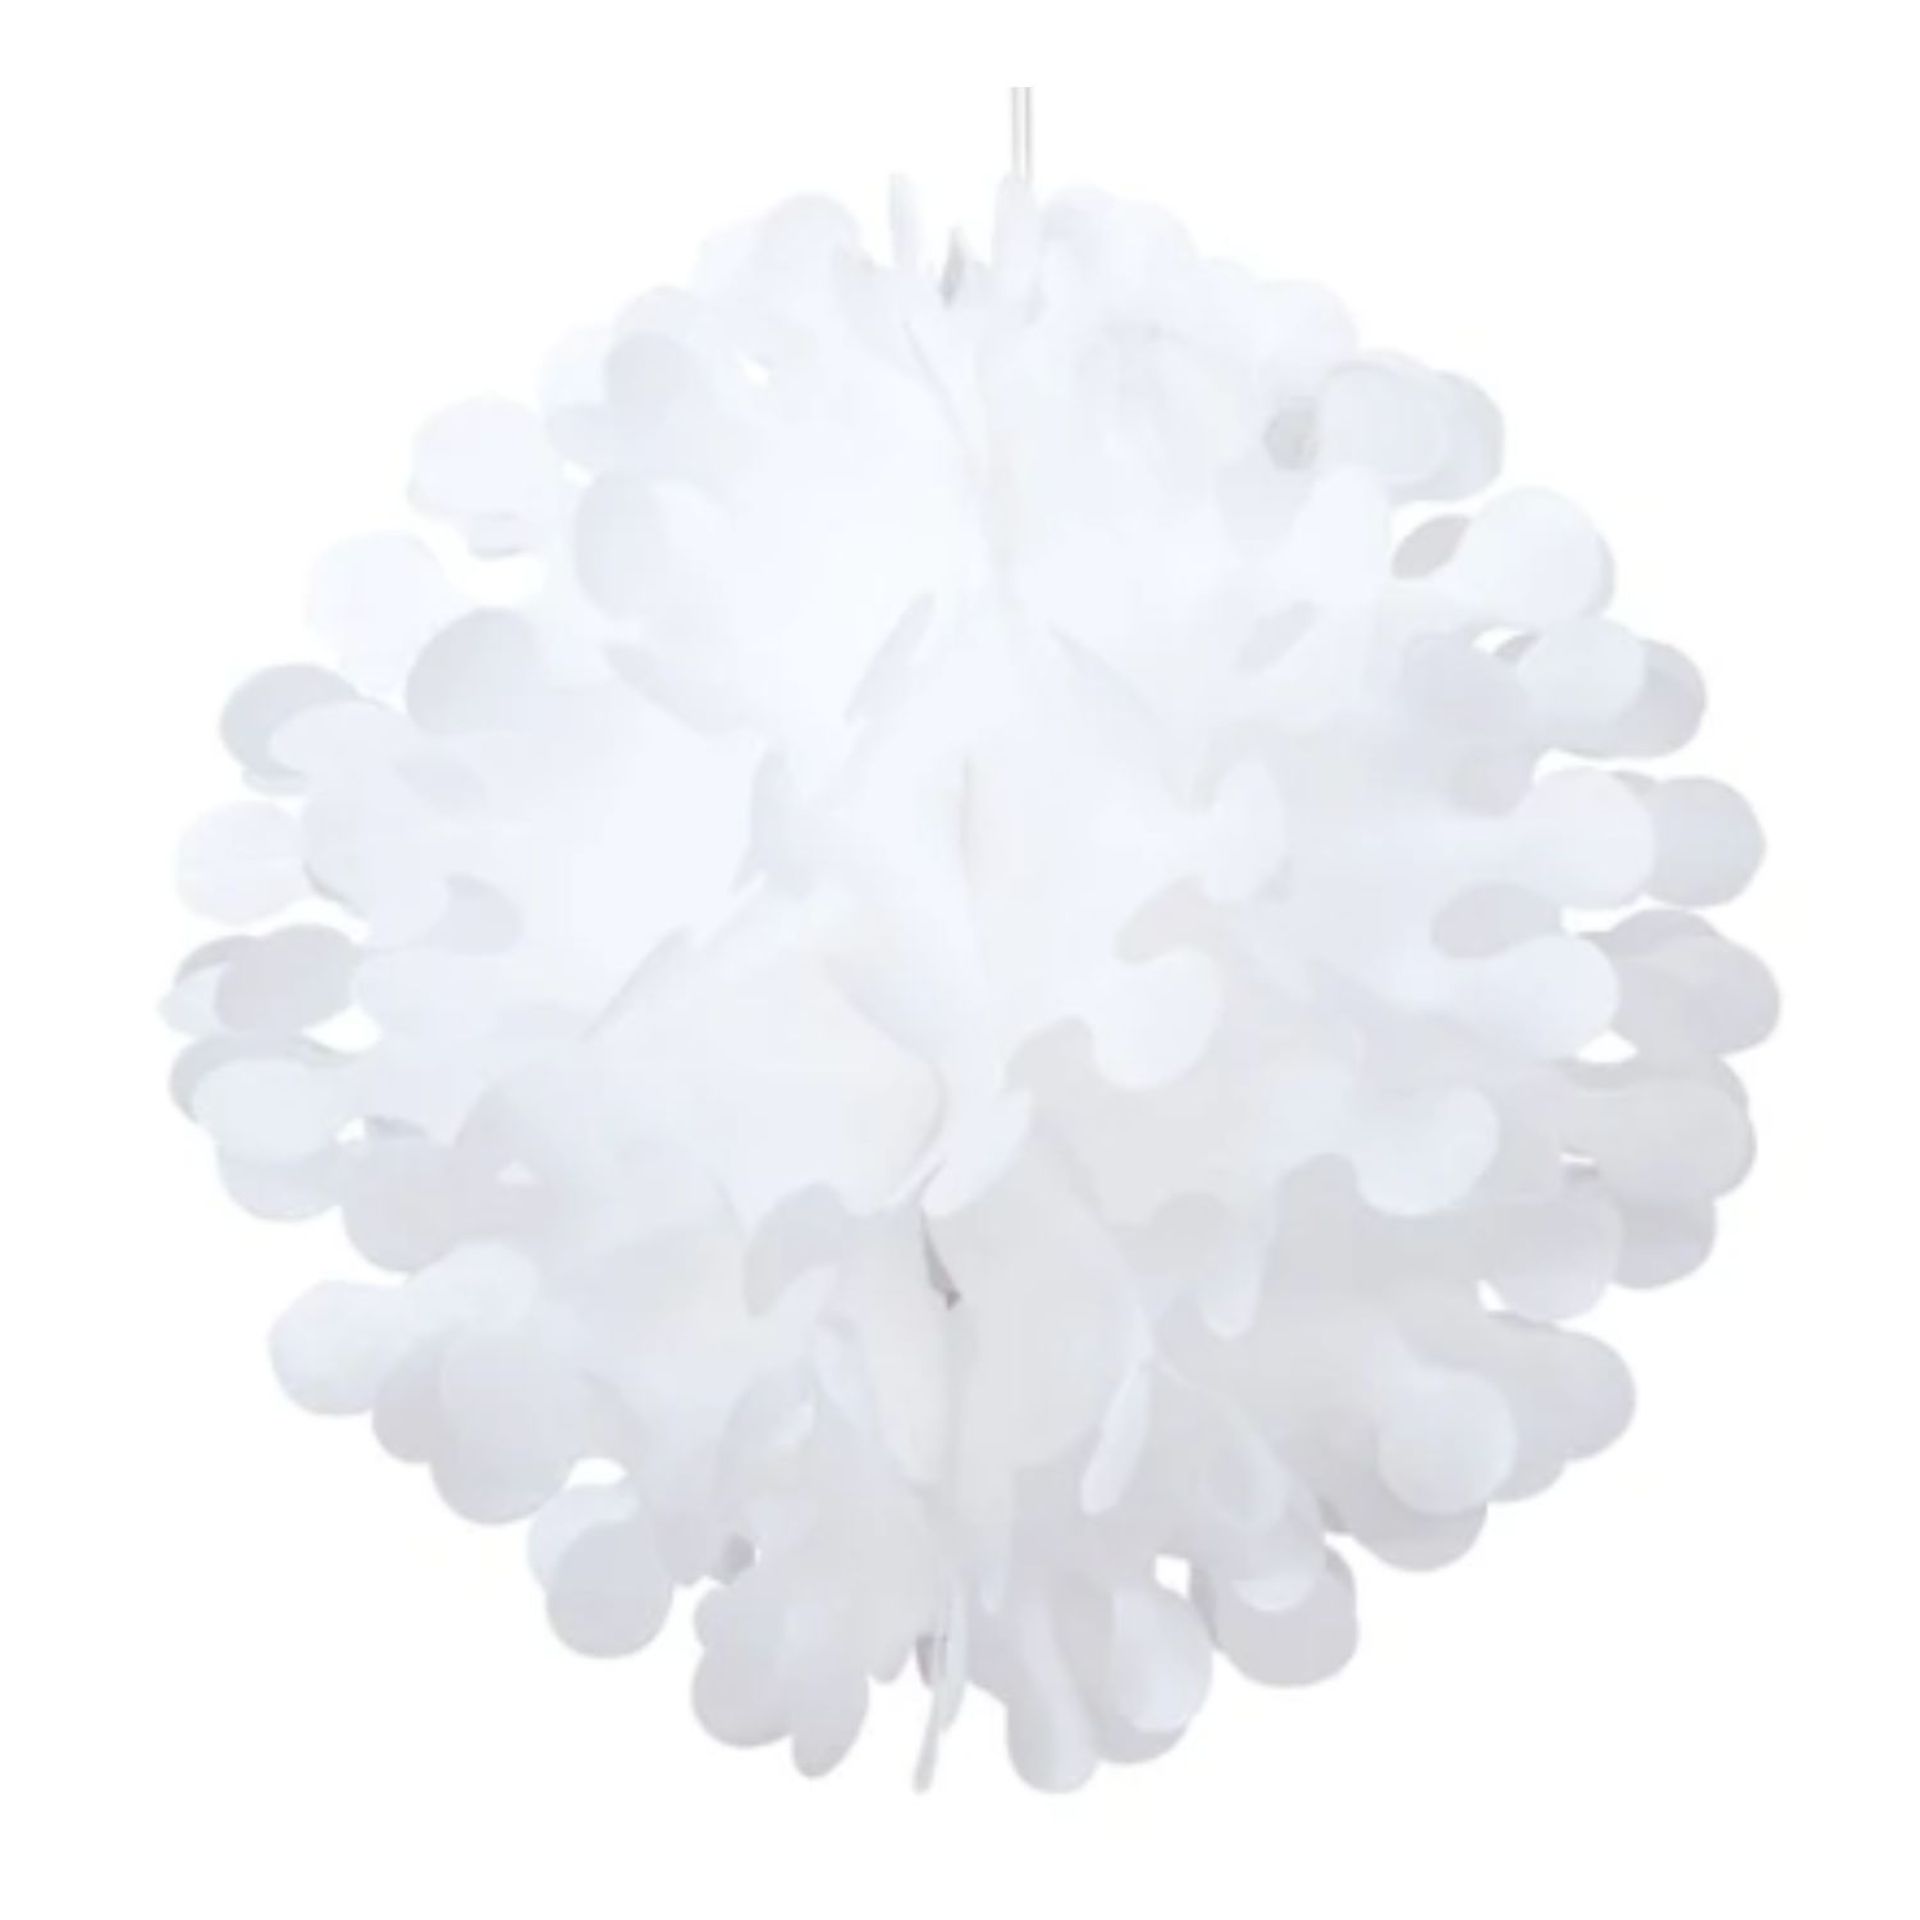 1000 PARTY SUPPLIES 12" FLUTTER TISSUE PAPER BALL - RANGE OF COLOURS, RRP £10,000 - Image 9 of 9